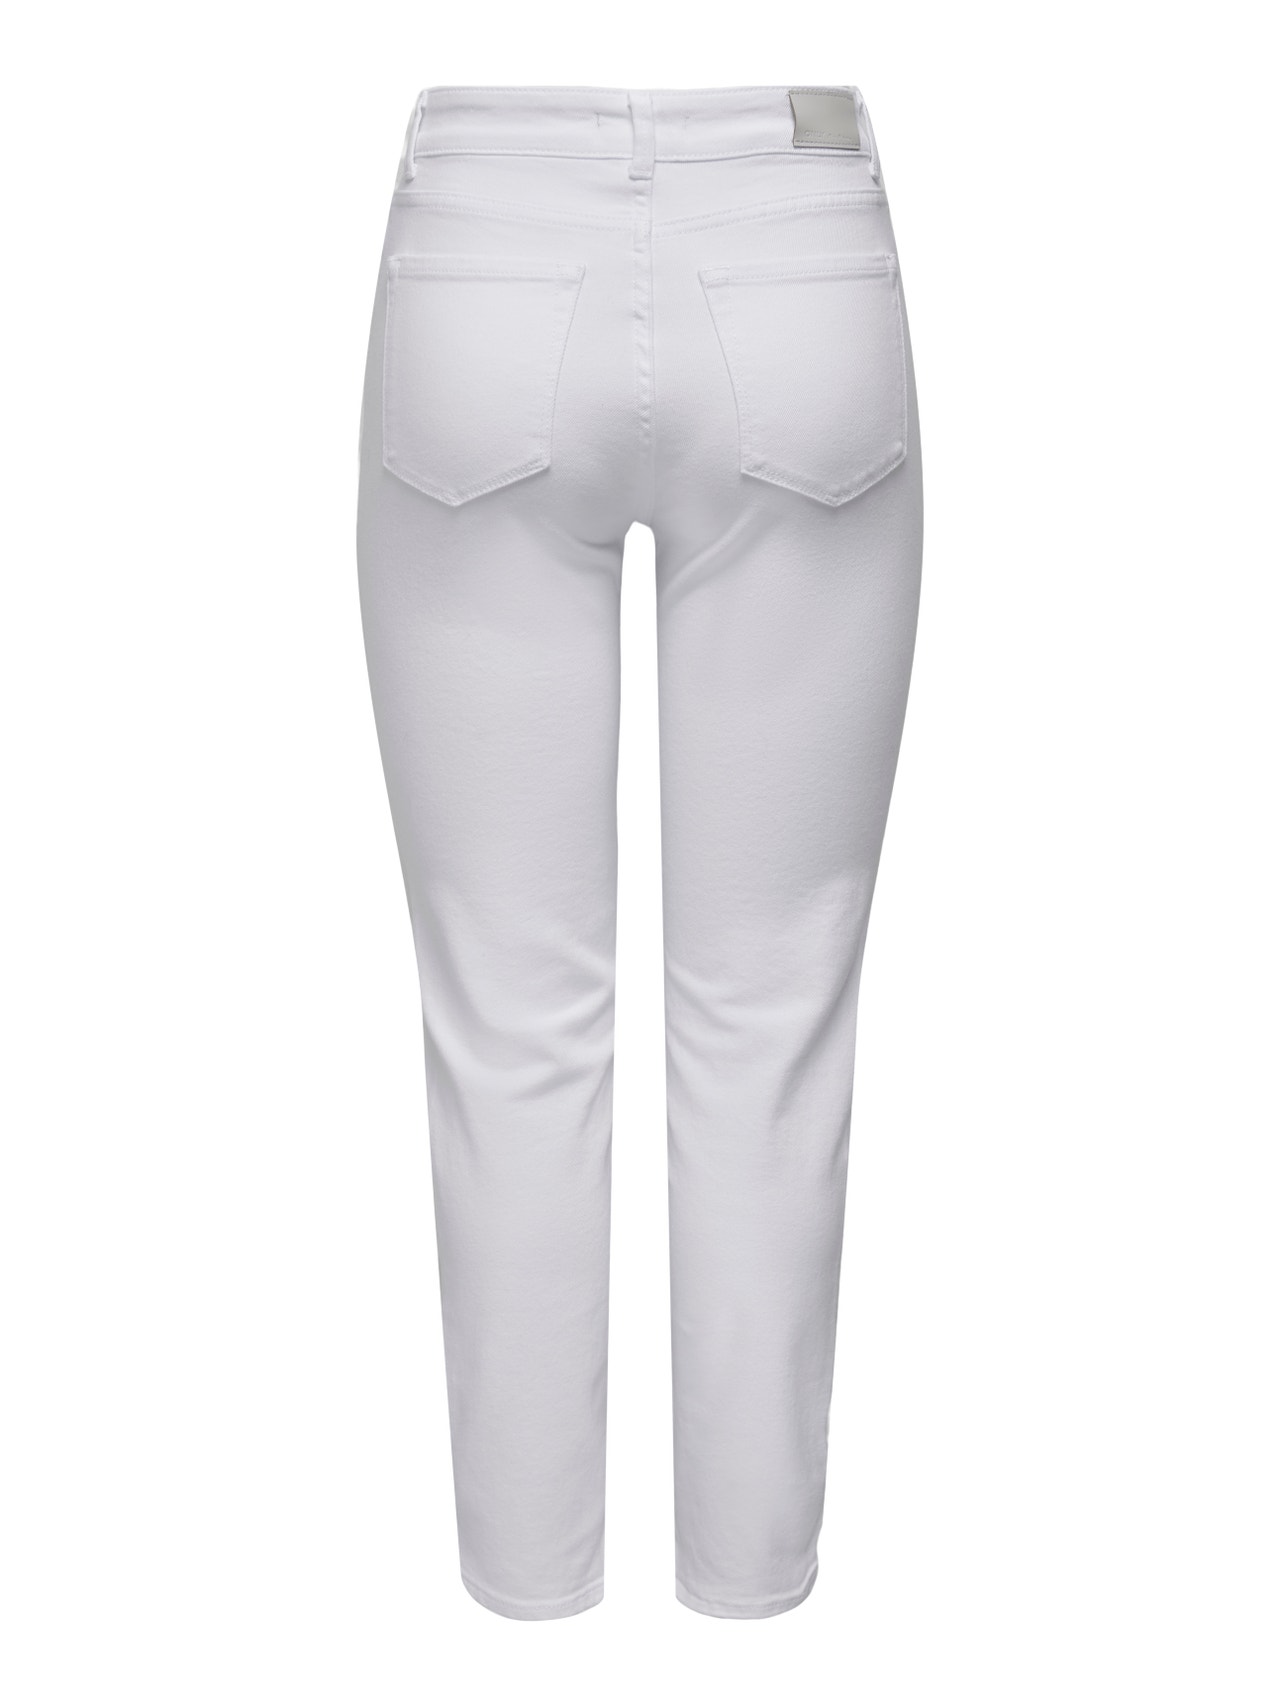 ONLY Gerade geschnitten Hohe Taille Jeans -White - 15292435